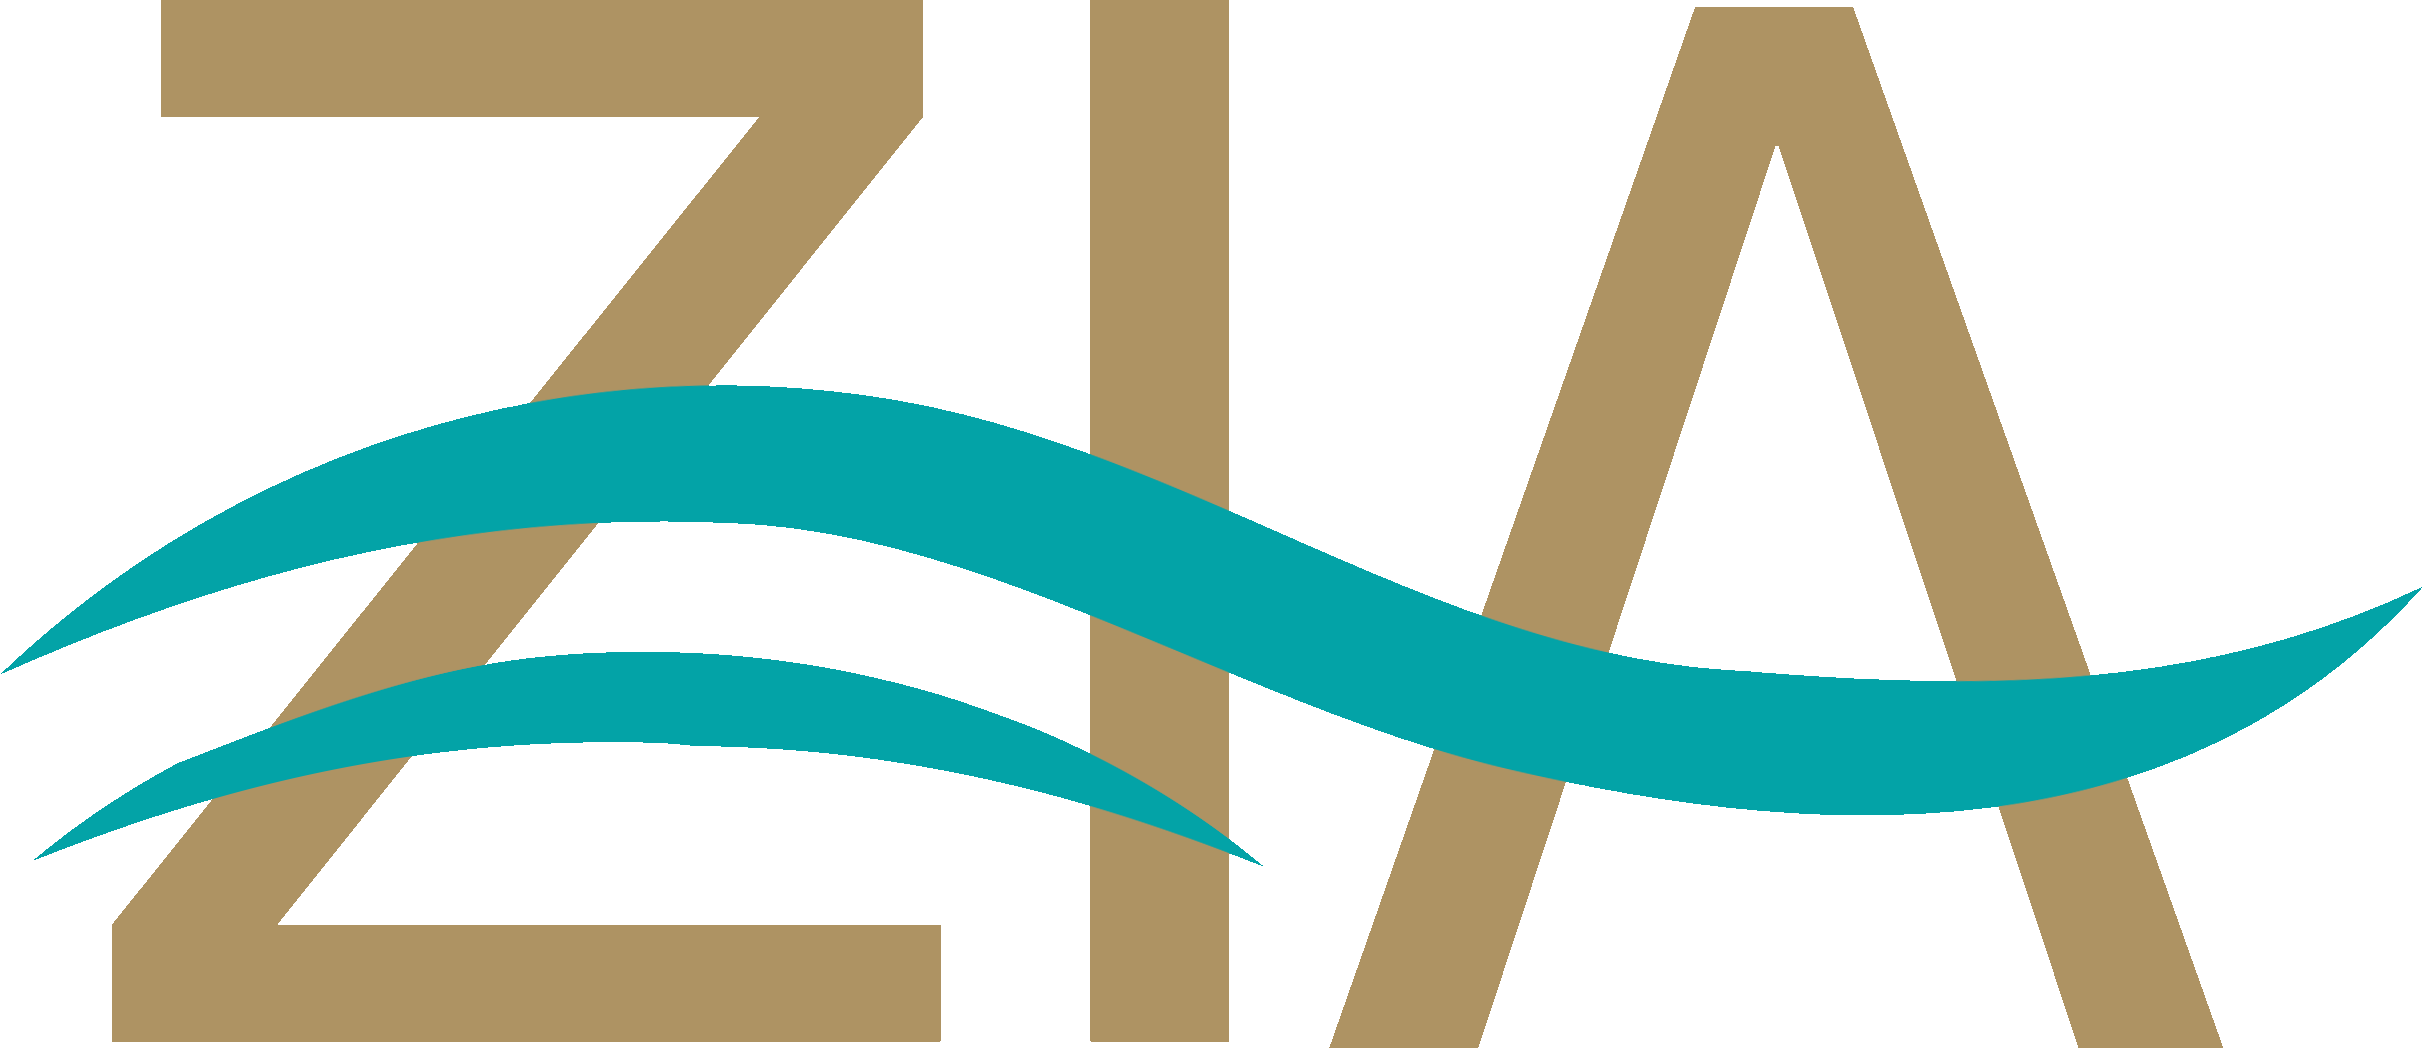 Zia Is An Independent Business For Fashion Activewear - Zia (2424x1049)